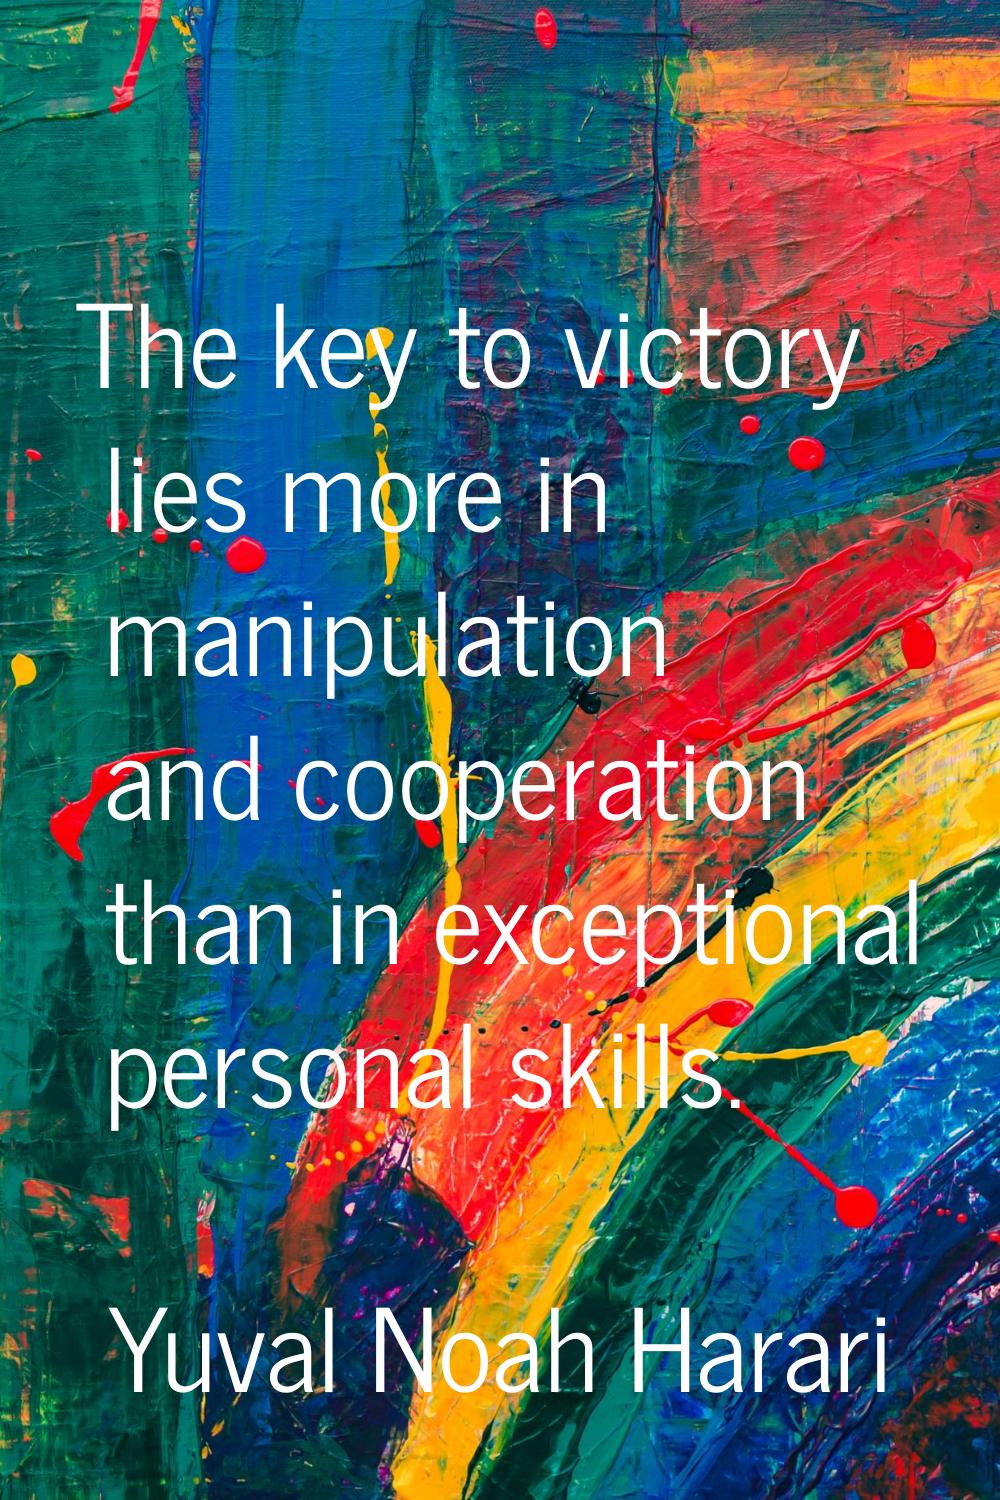 The key to victory lies more in manipulation and cooperation than in exceptional personal skills.